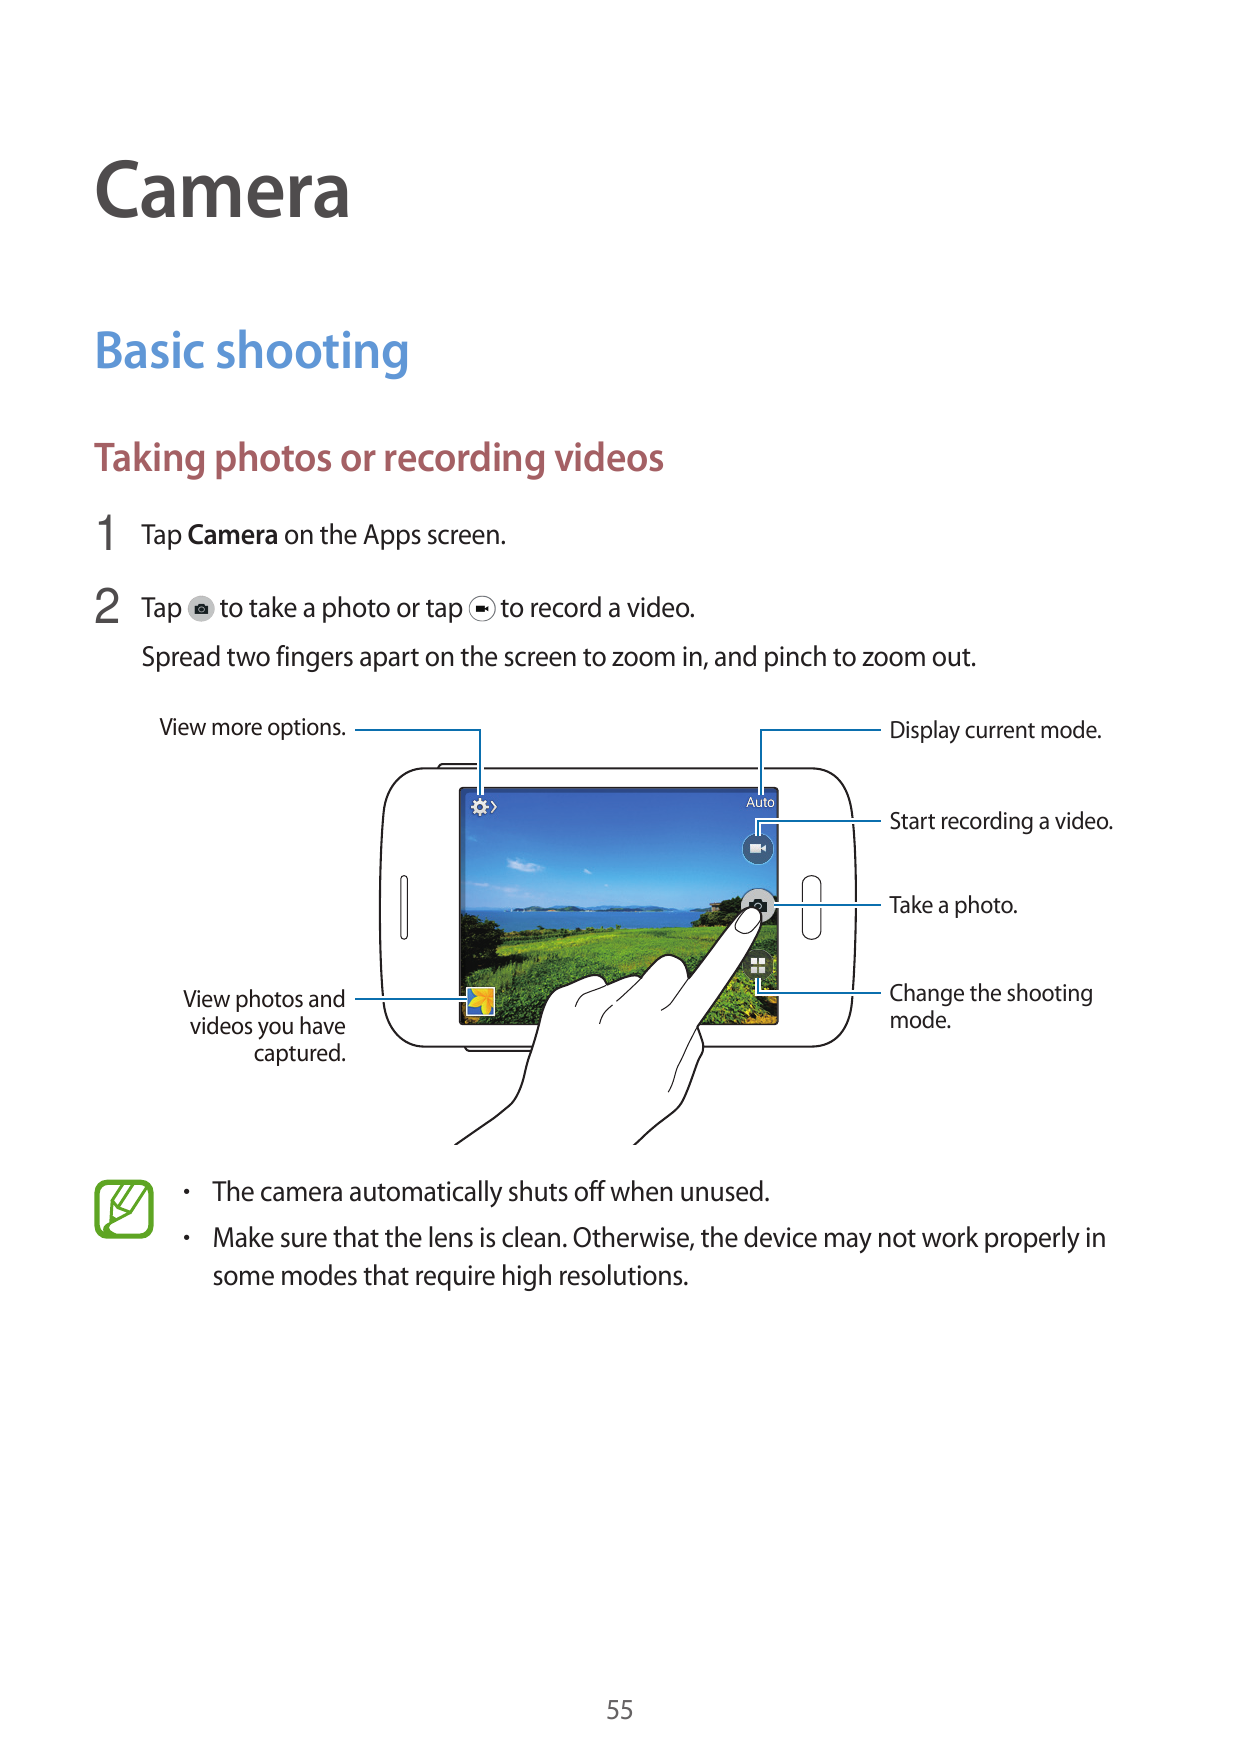 CameraBasic shootingTaking photos or recording videos1 Tap Camera on the Apps screen.2 Tap to take a photo or tap to record a vi